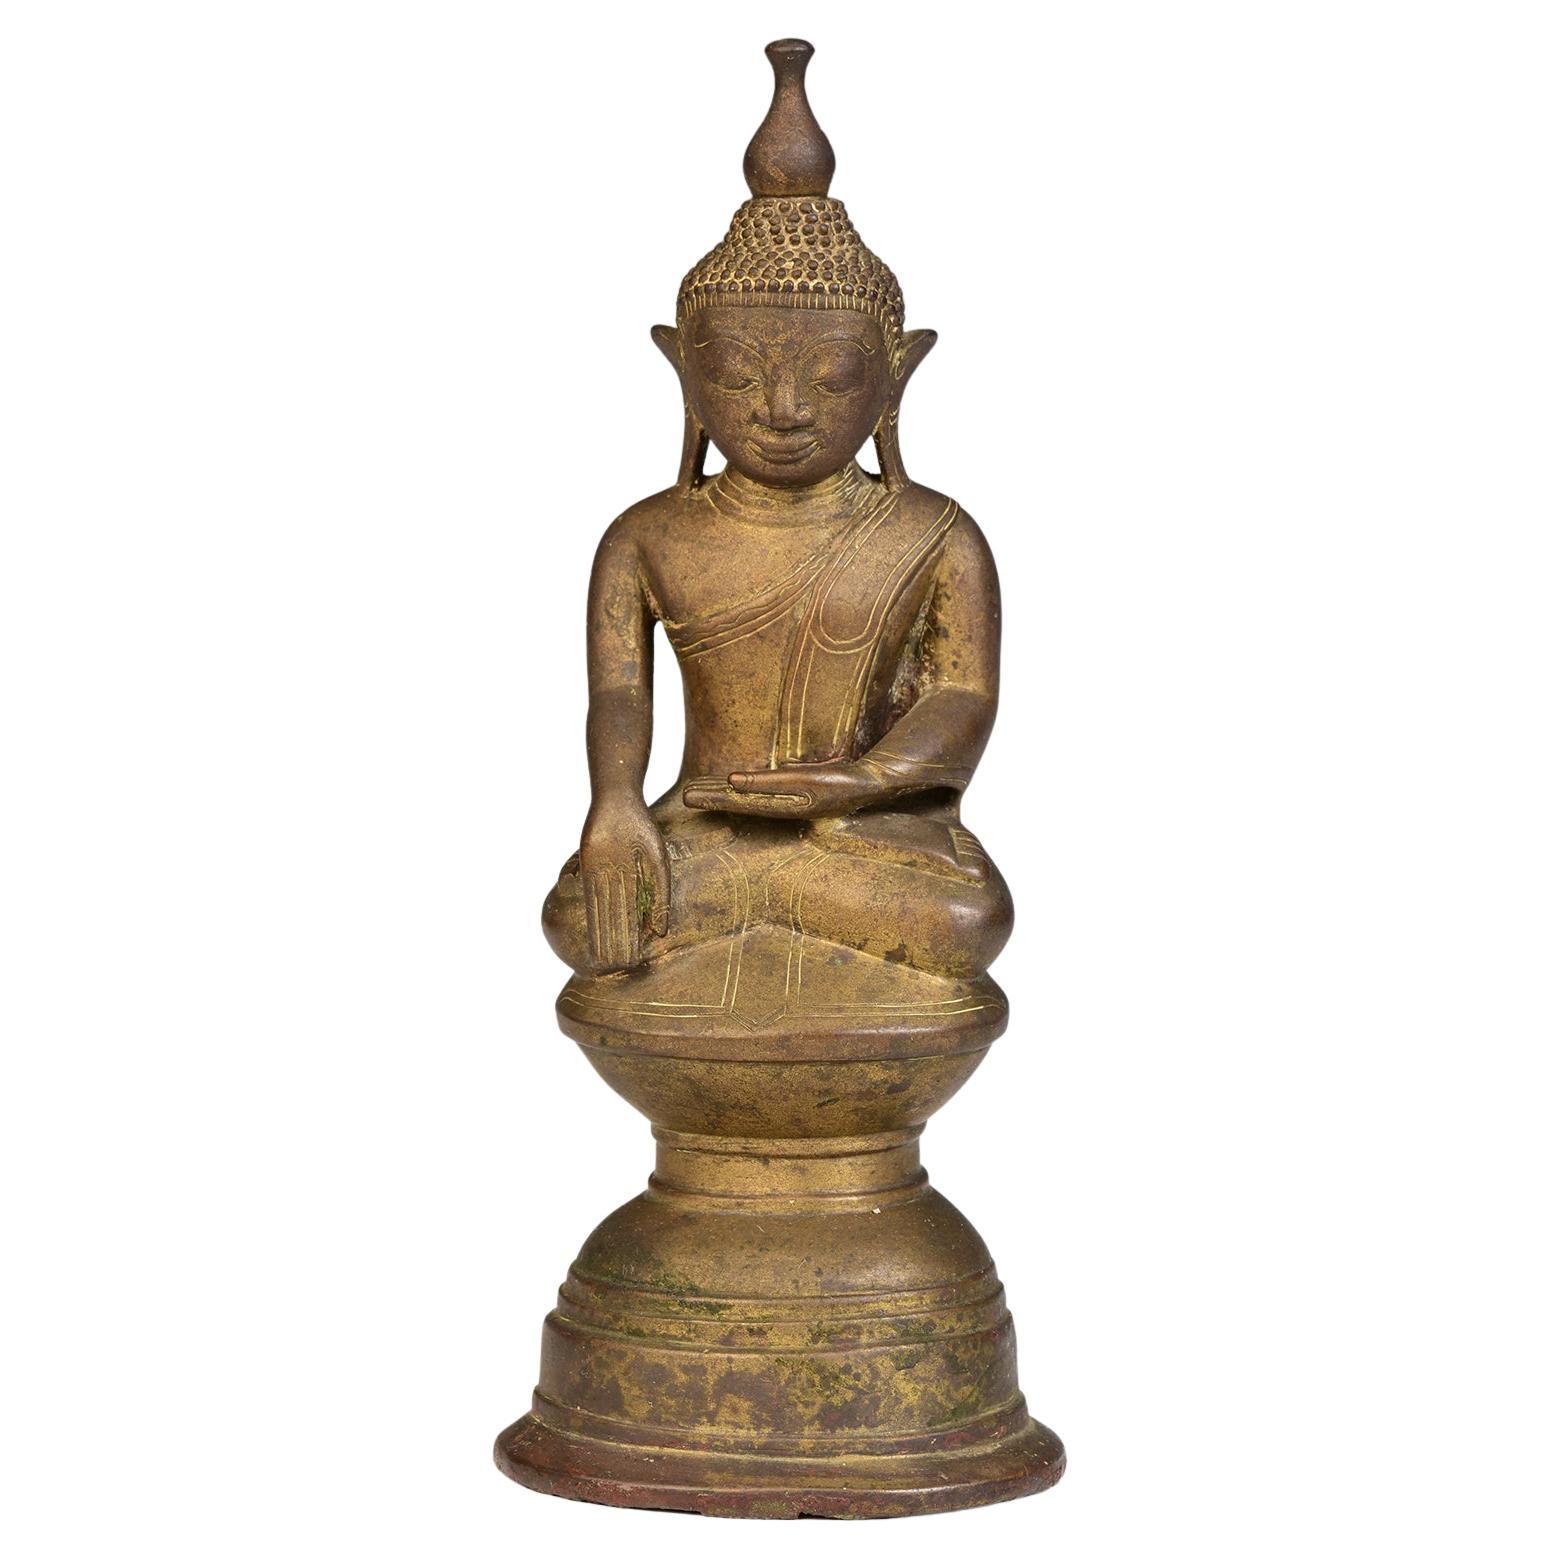 *** 25 grams*** Rare Antique Buddha from Siam Finest AYUTTHAYA ANCIENT Buddhas from Siam Thailand